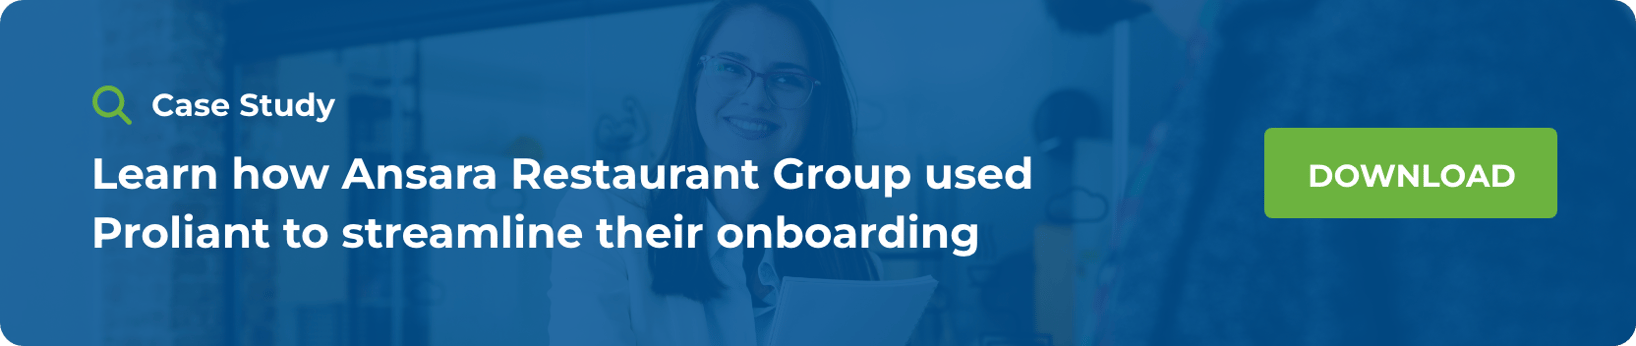 Case study  Learn how Ansara Restaurant Group used Proliant to streamline their onboarding